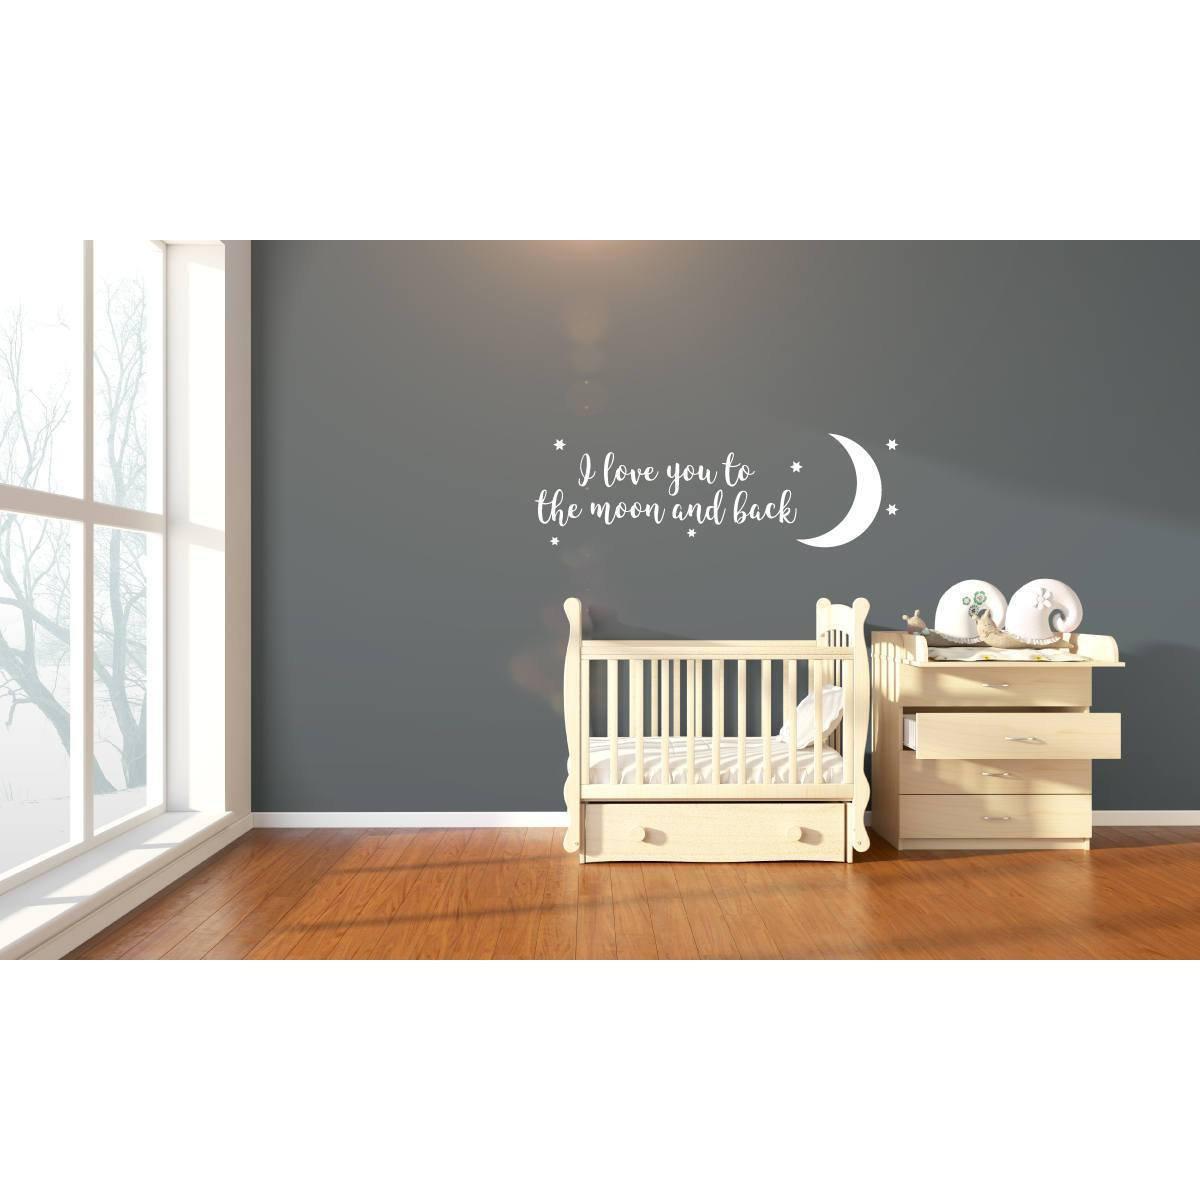 I Love You Quote, Wall Quotes, Decal Quotes, Vinyl Decal, Vinyl Wall Decal, Kids Wall Decal, Kids Wall Sticker, Moon Decals, Moon Stars, Art